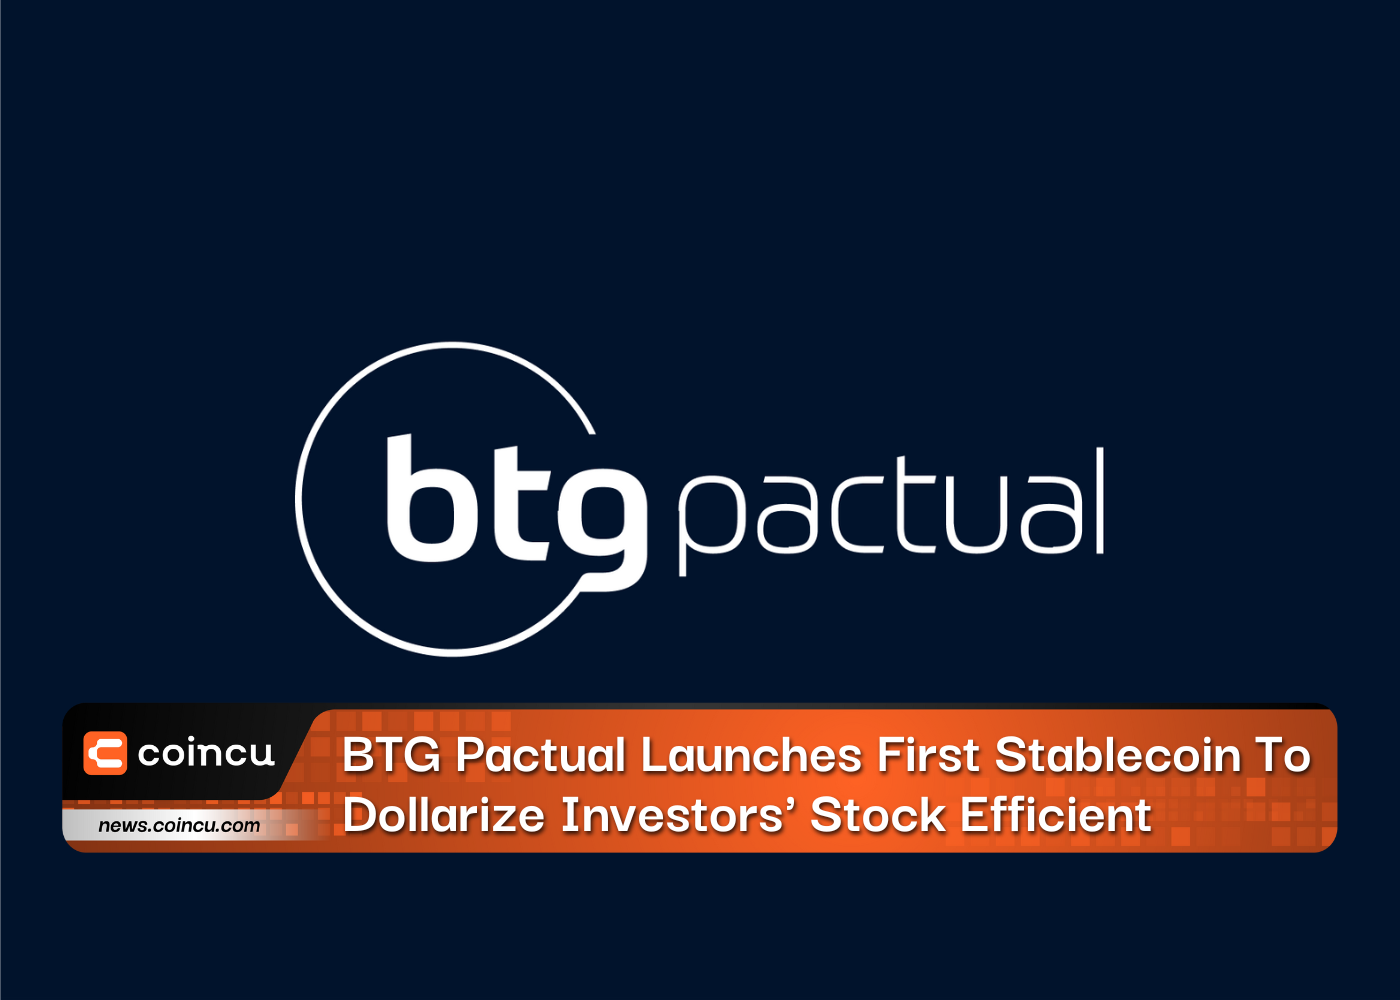 BTG Pactual Launches First Stablecoin To Dollarize Investors' Stock Efficient